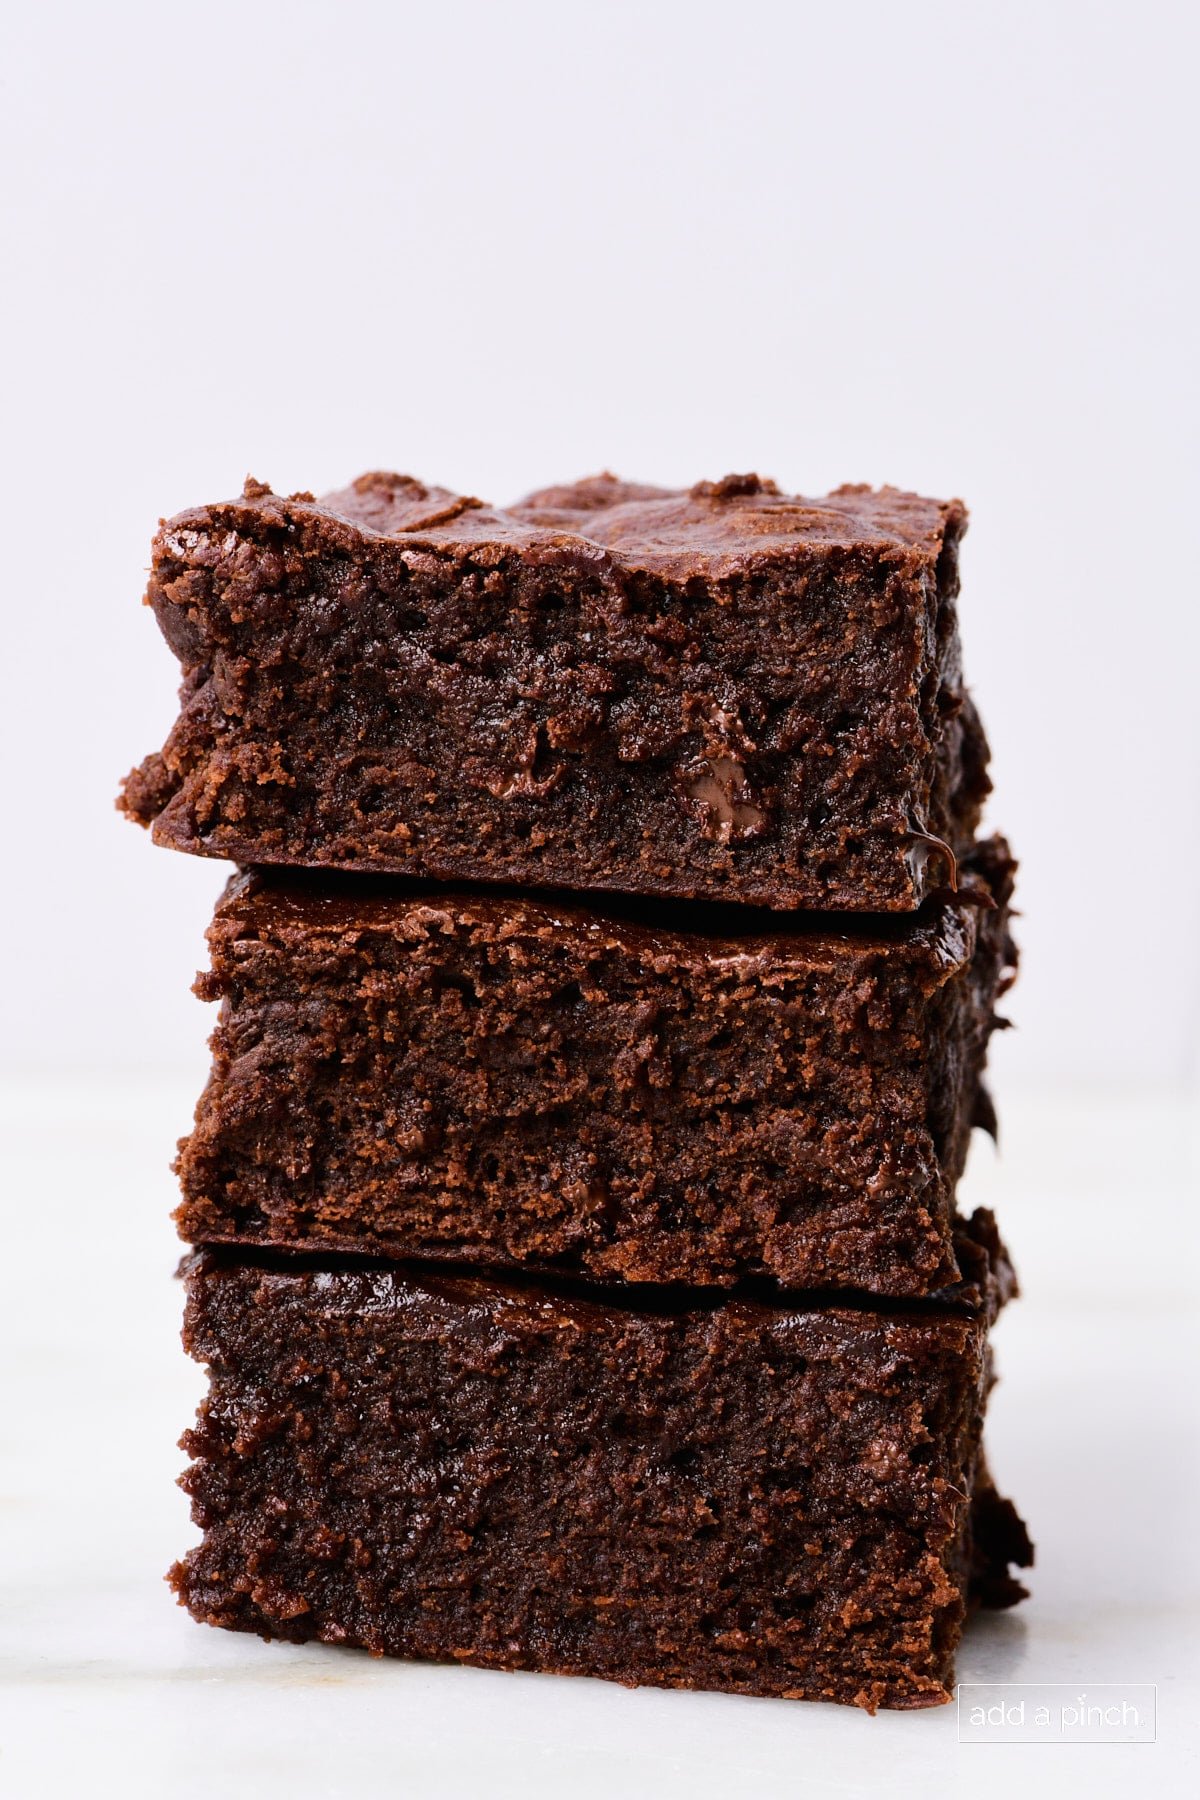 Stack of baked brownies on a marble countertop.